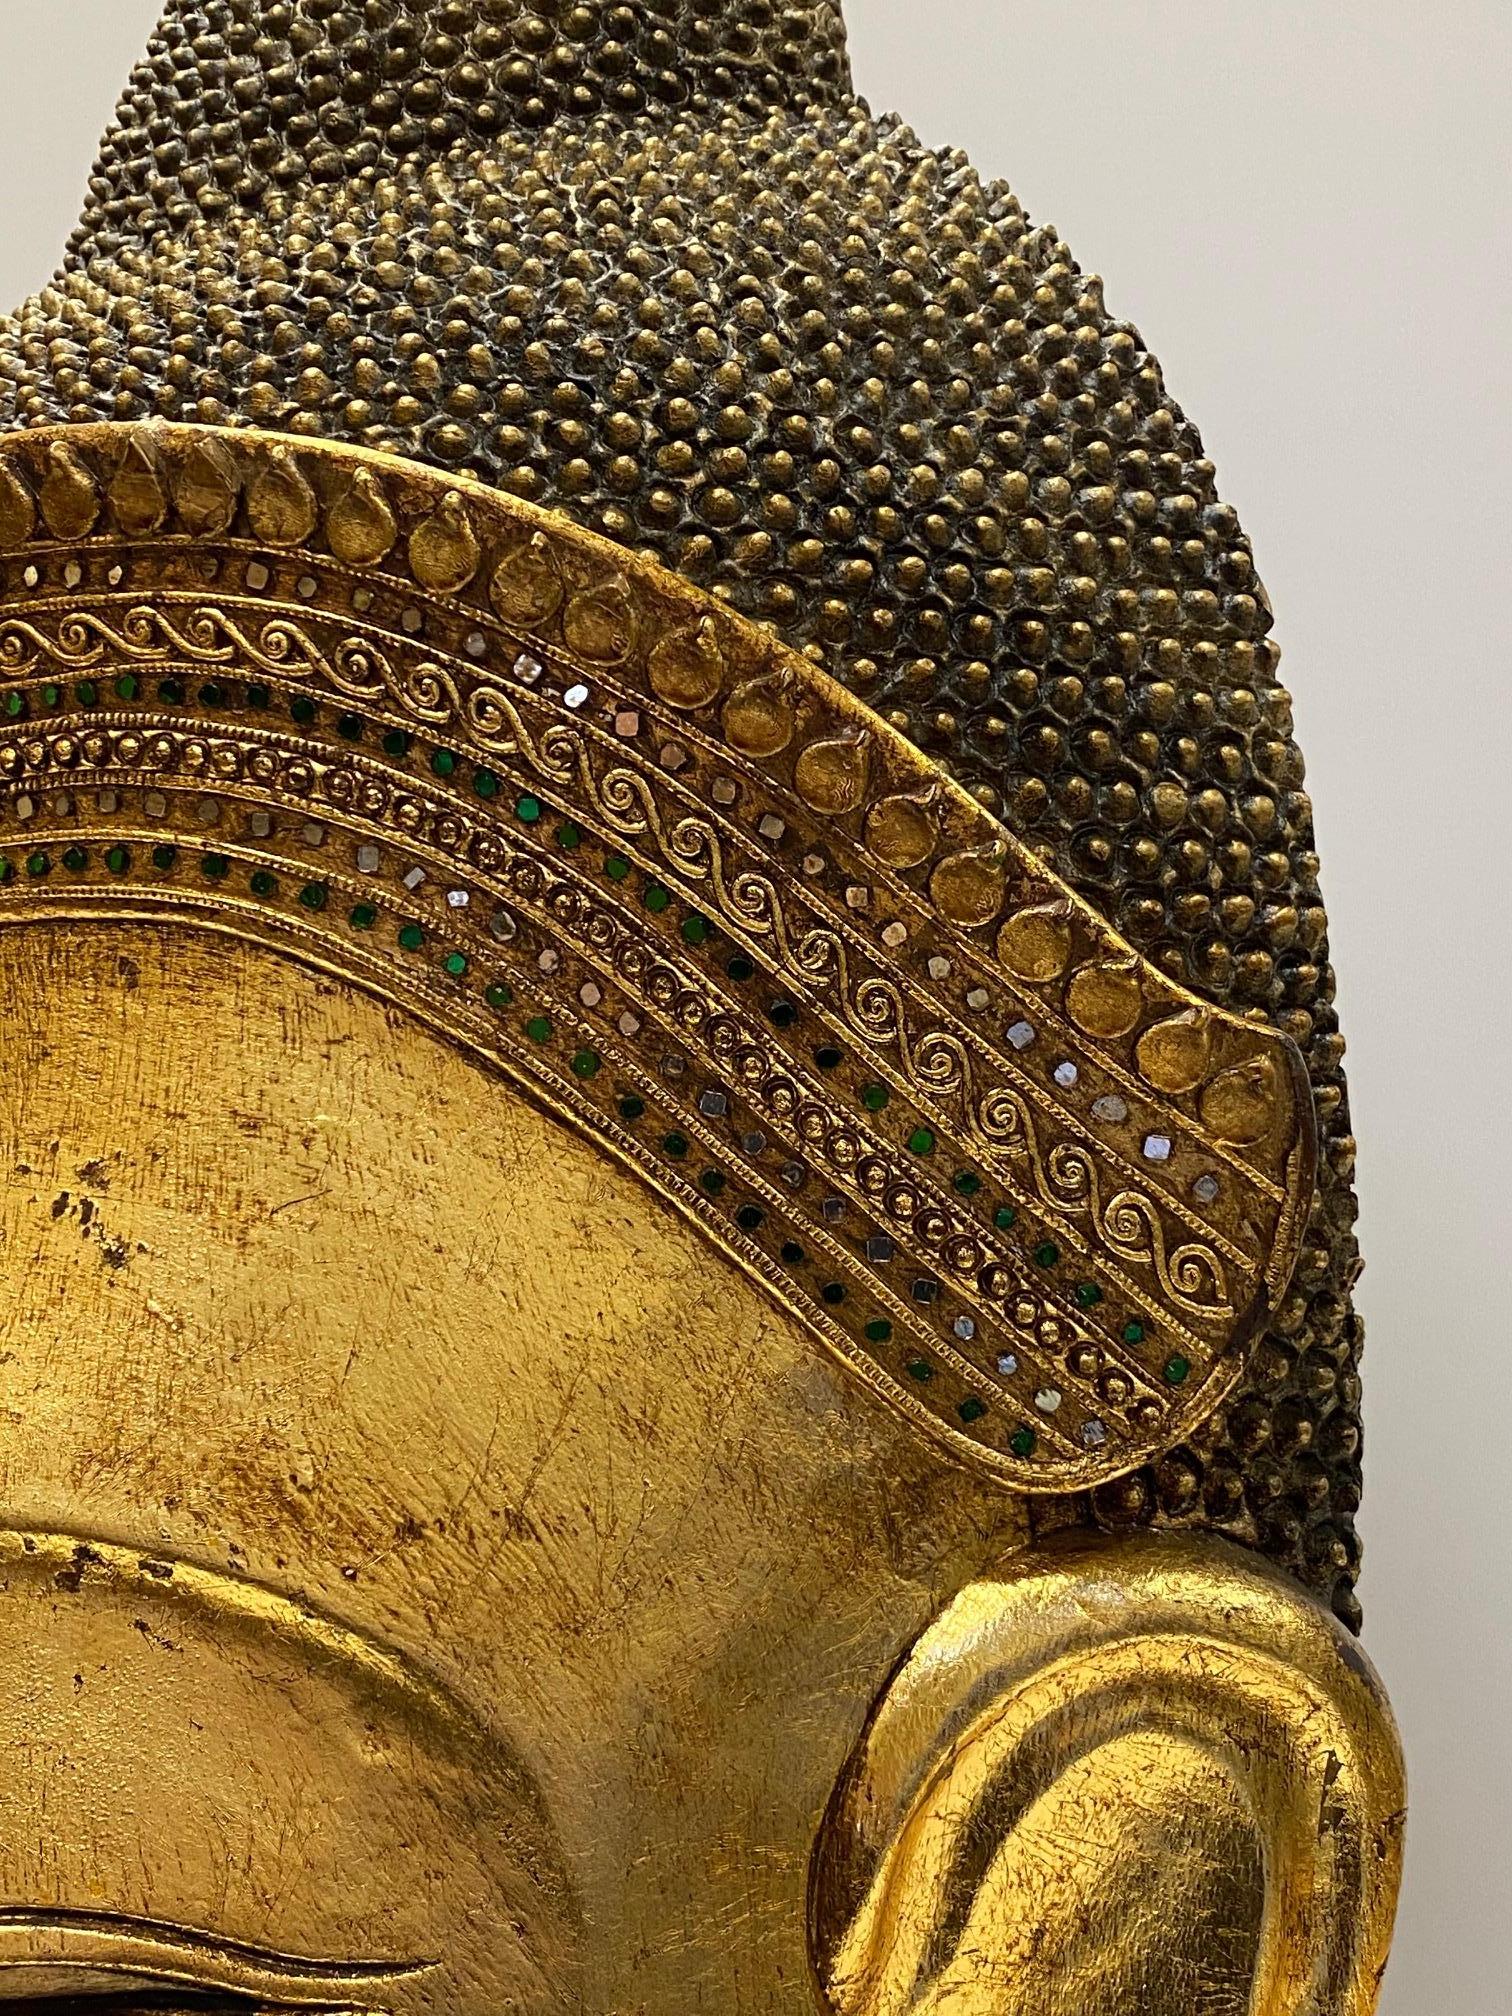 Magnificent Monumentally Large Carved Gilded Thai Buddha Head 3